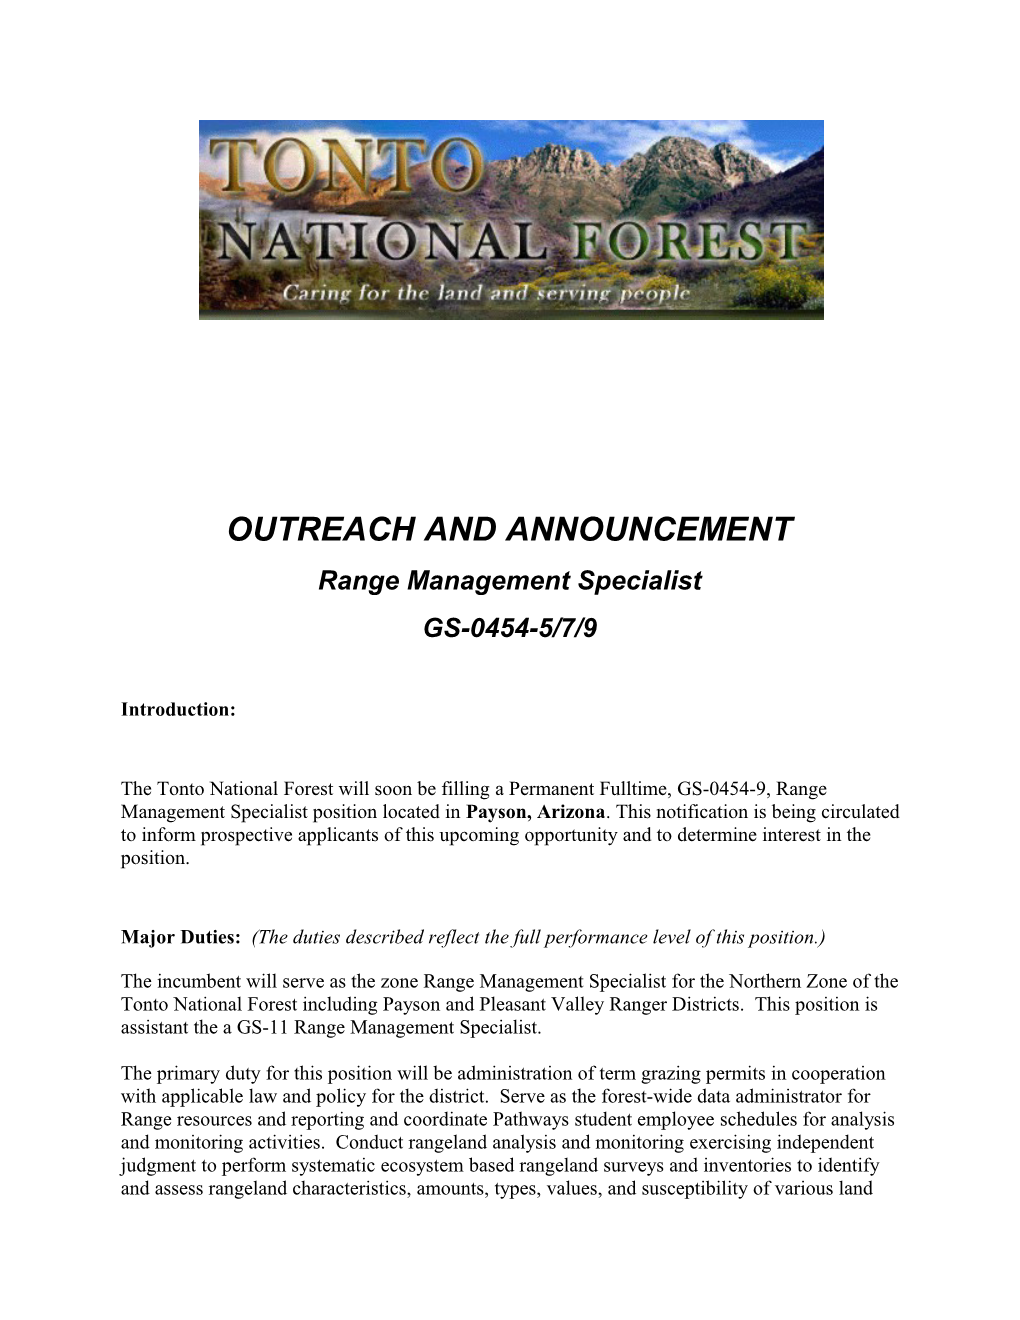 Outreach and Announcement